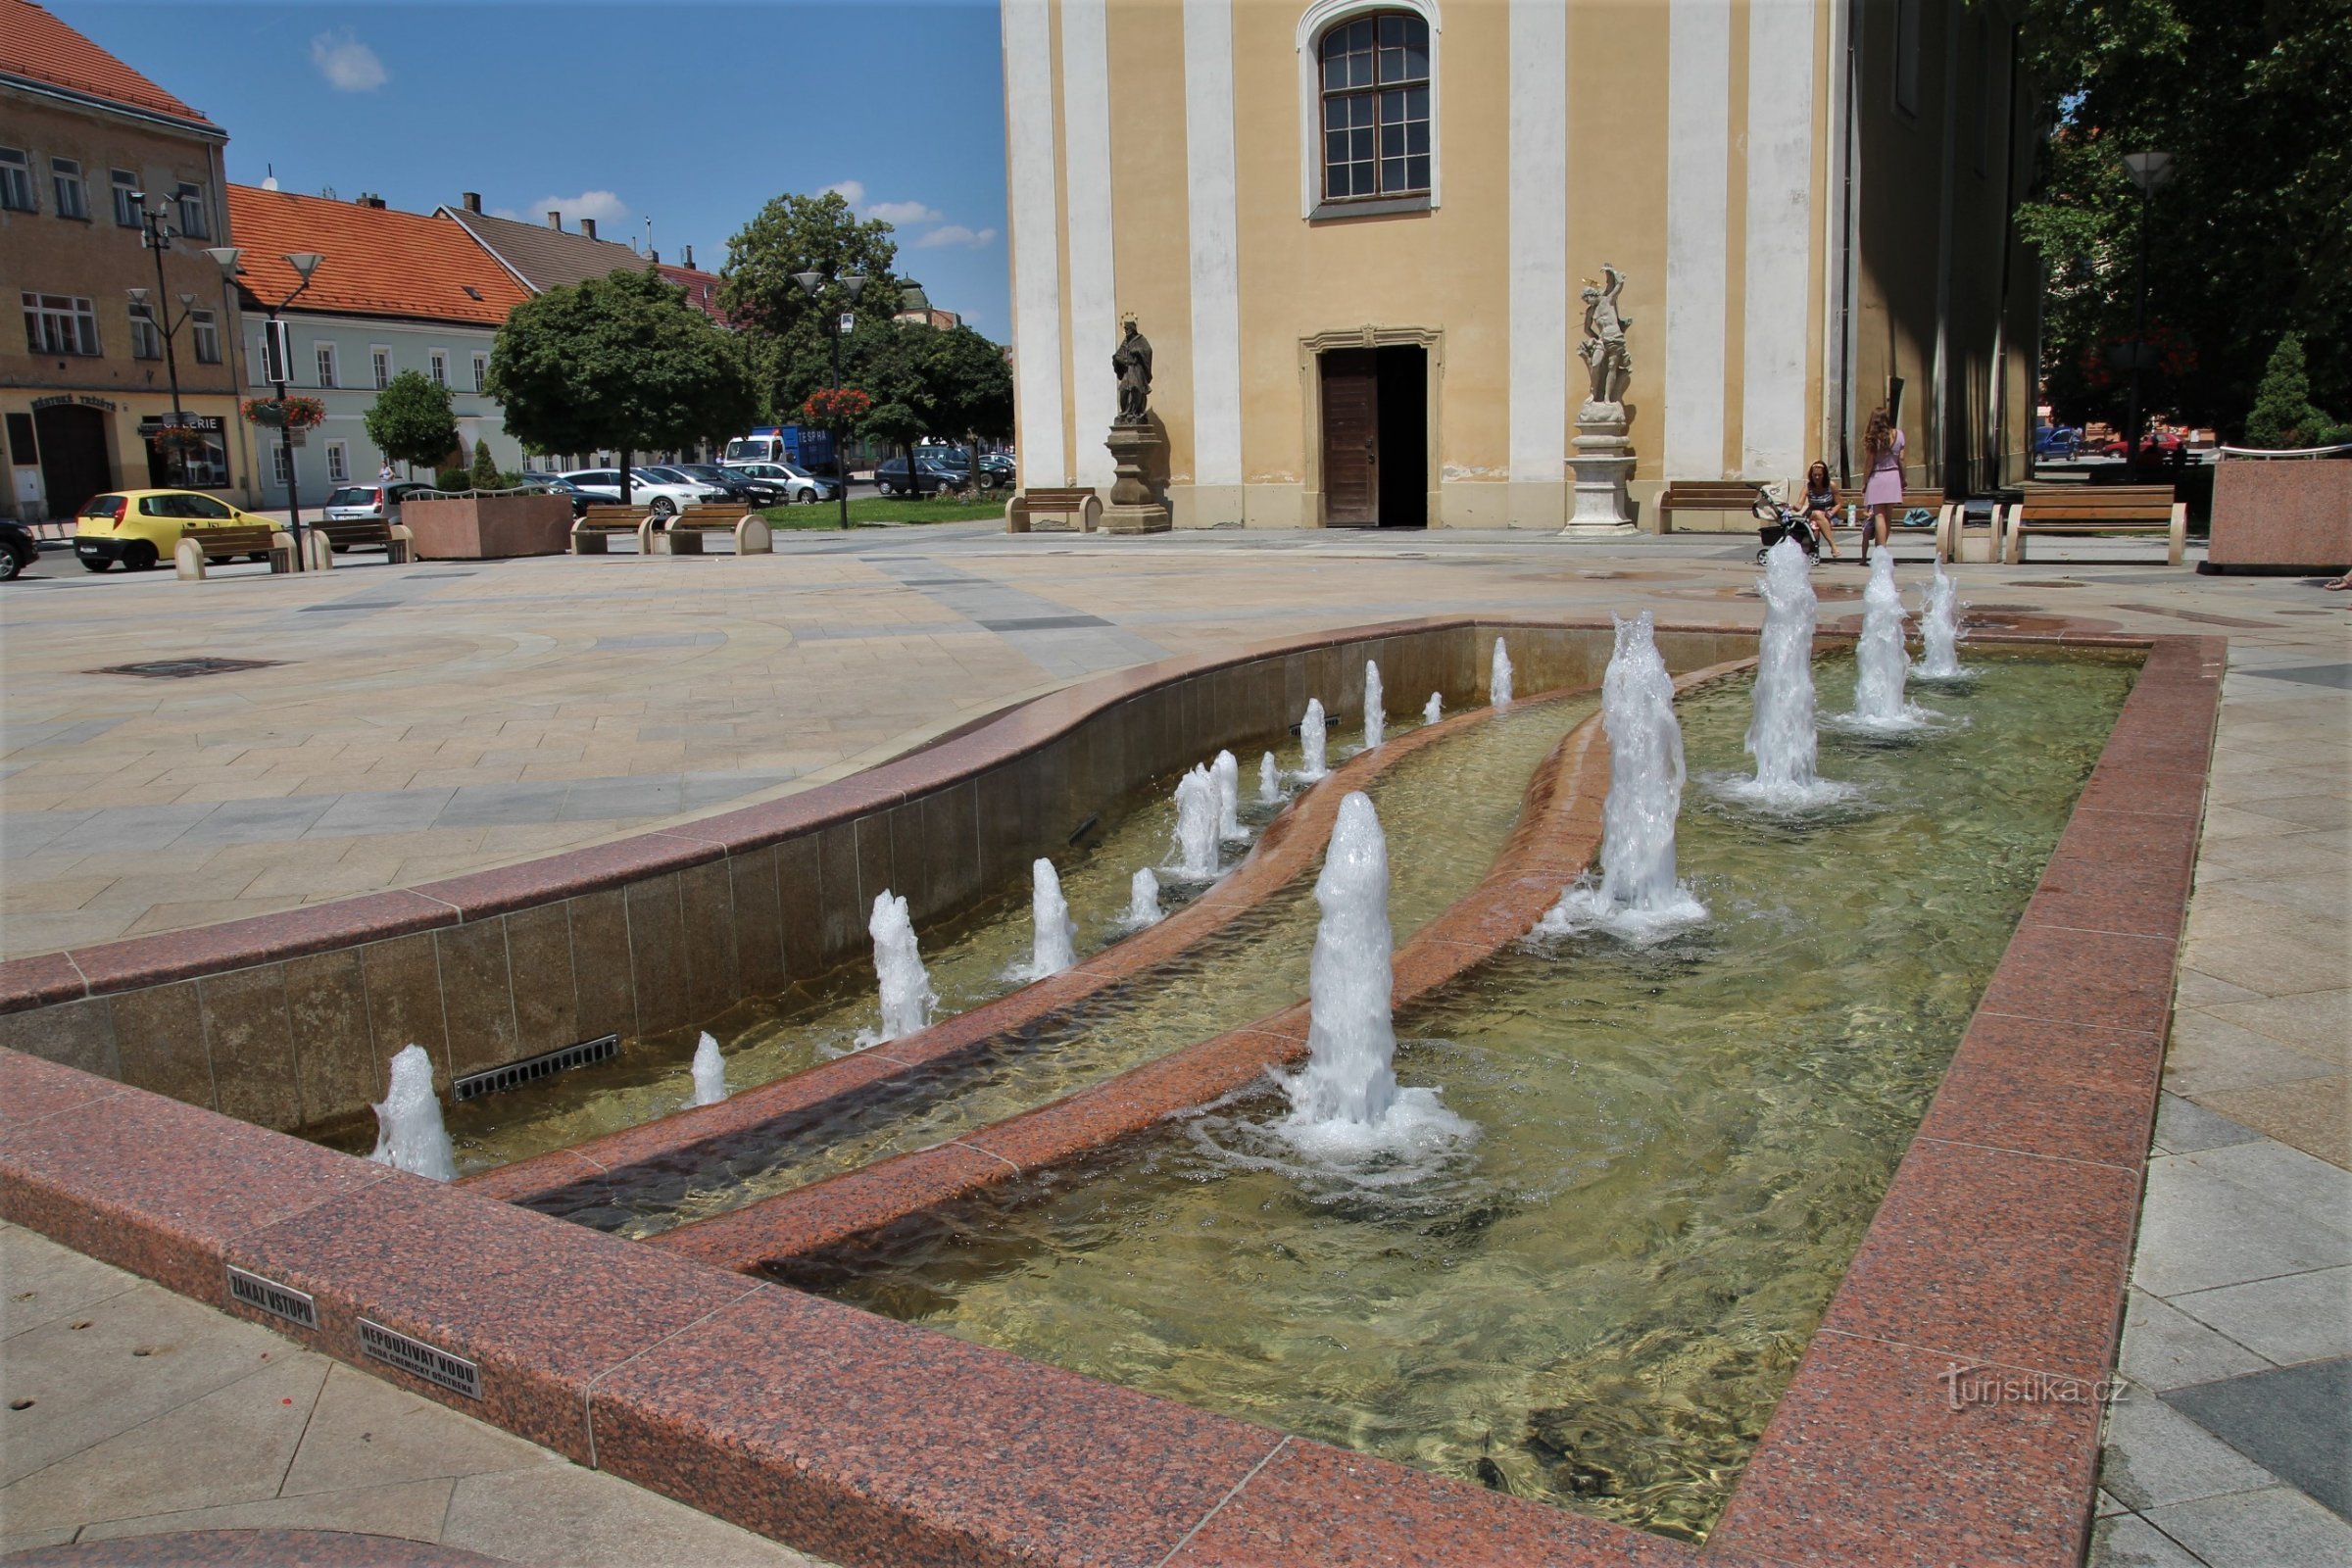 The singing fountain is near the church of St. Lawrence